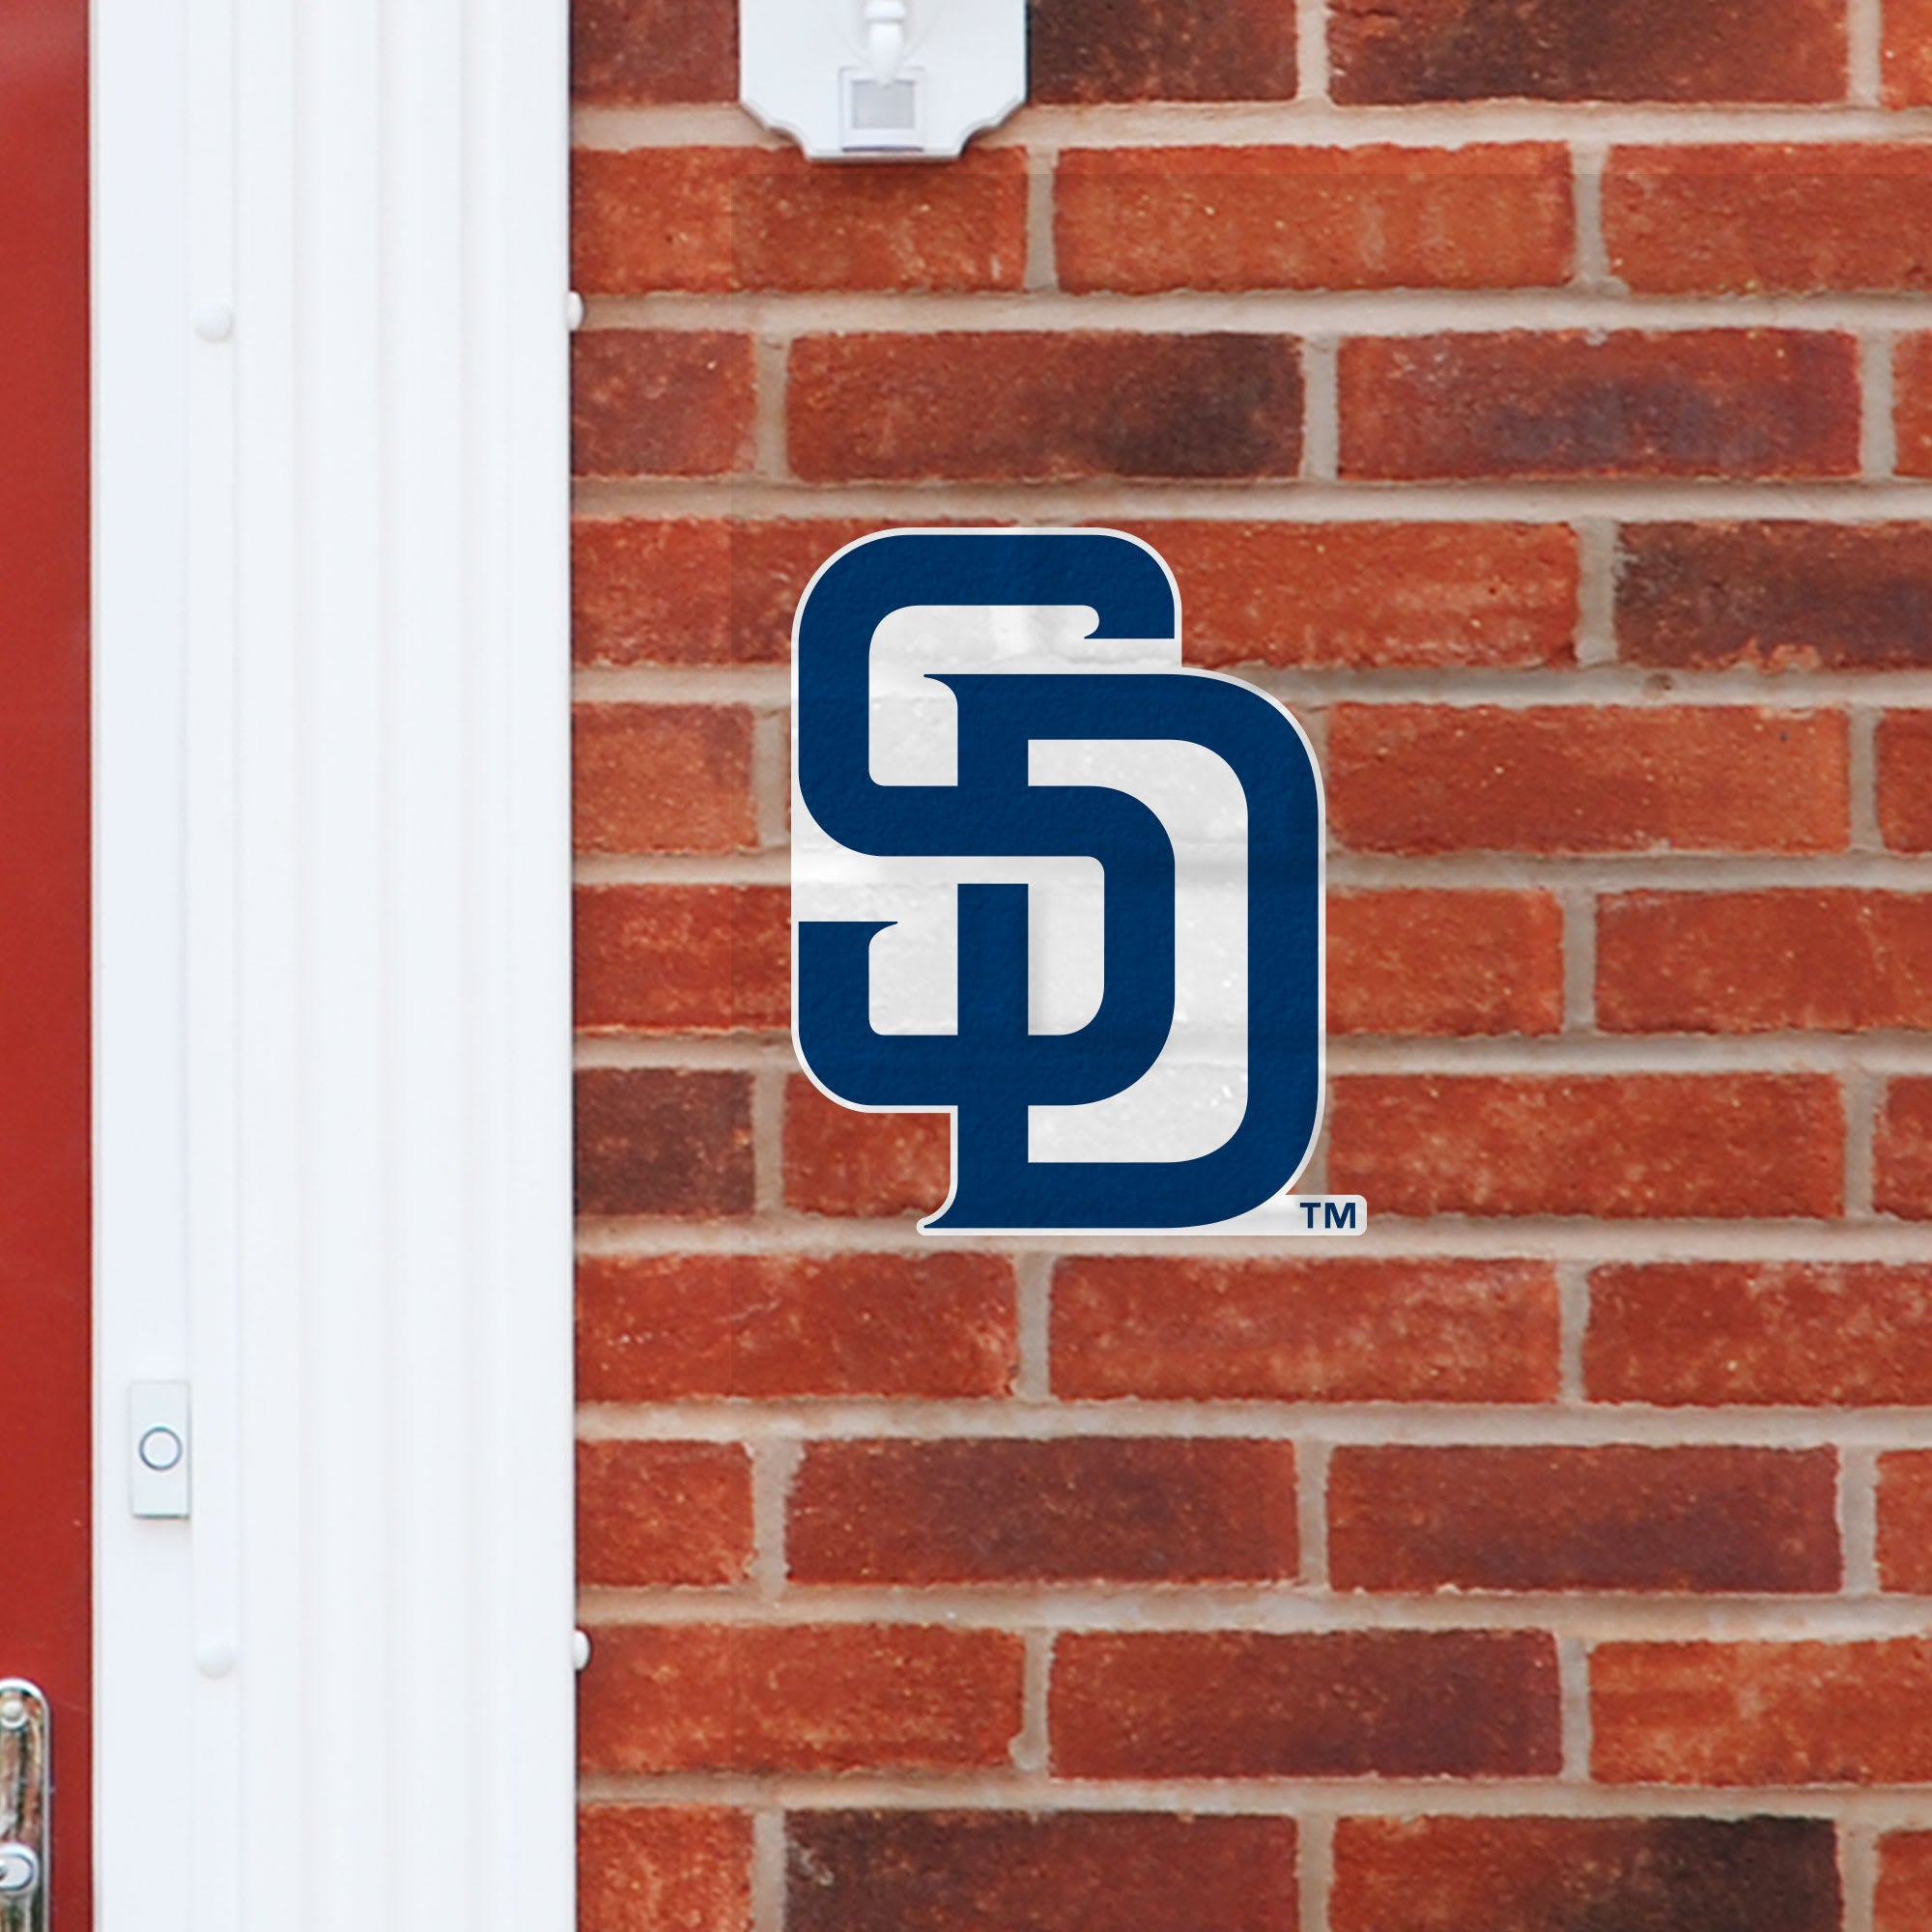 San Diego Padres: Logo - Officially Licensed MLB Outdoor Graphic Large by Fathead | Wood/Aluminum